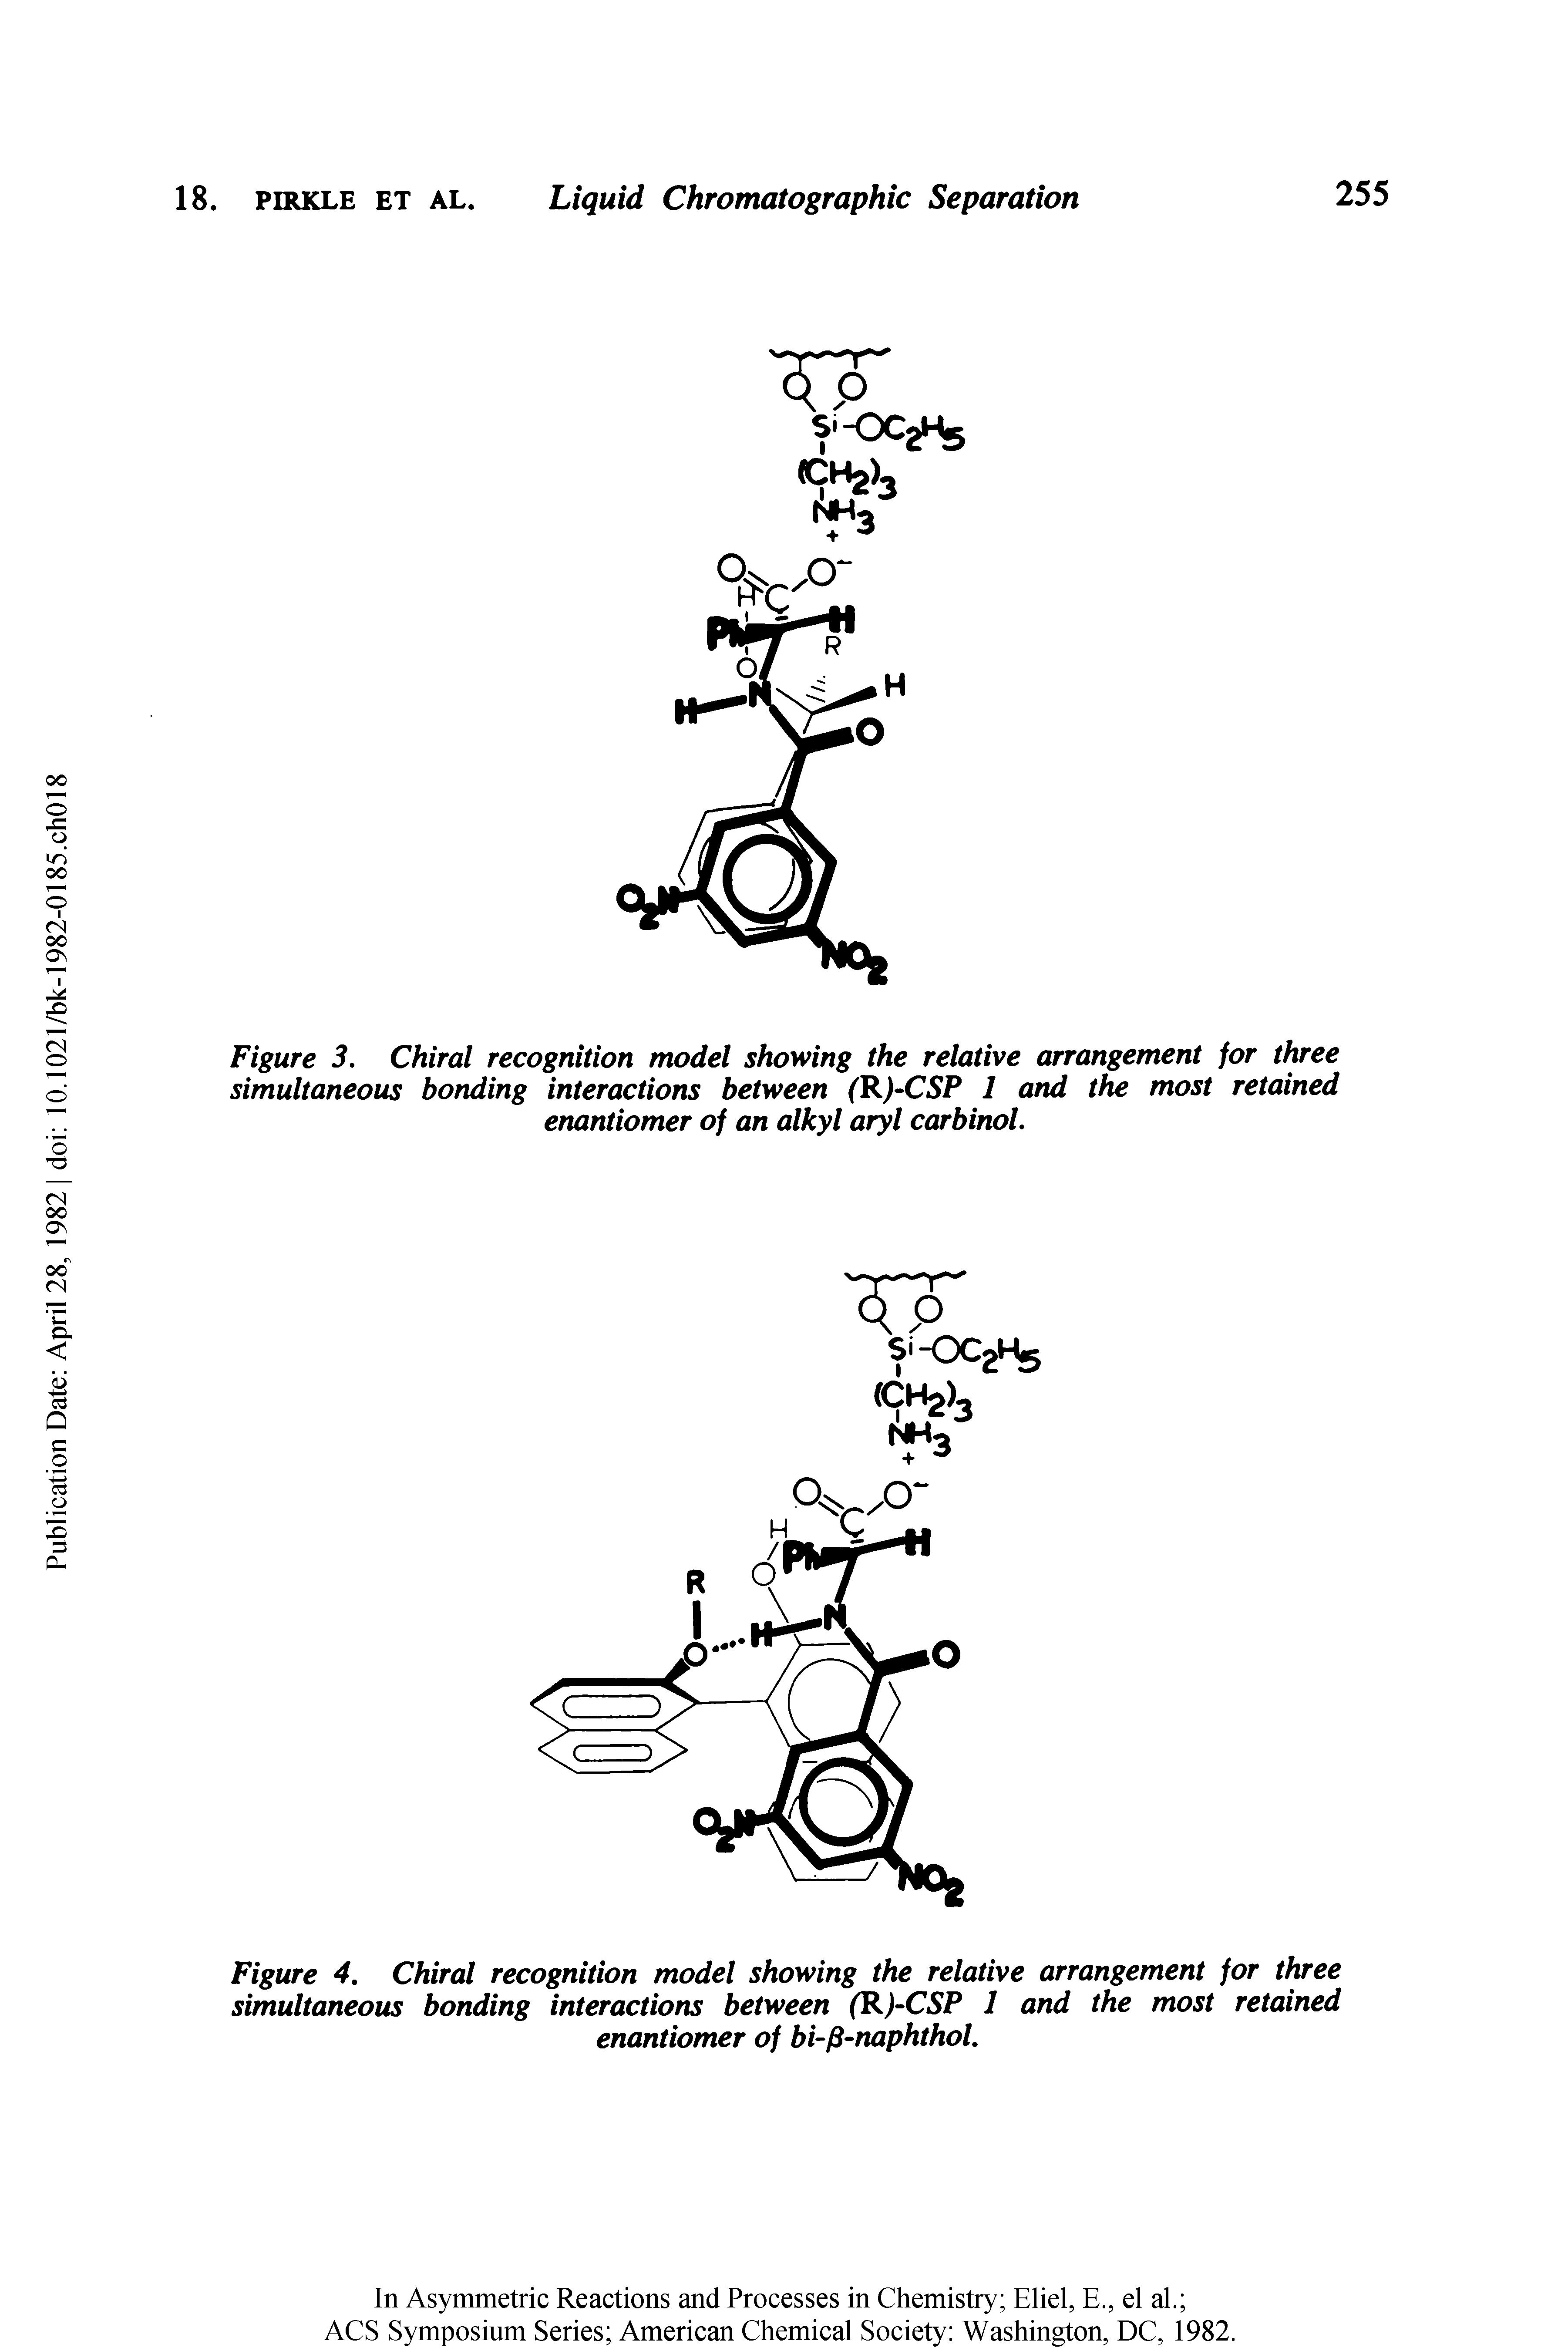 Figure 4, Chiral recognition model showing the relative arrangement for three simultaneous bonding interactions between (K)-CSP 1 and the most retained enantiomer of bi- -naphthol.